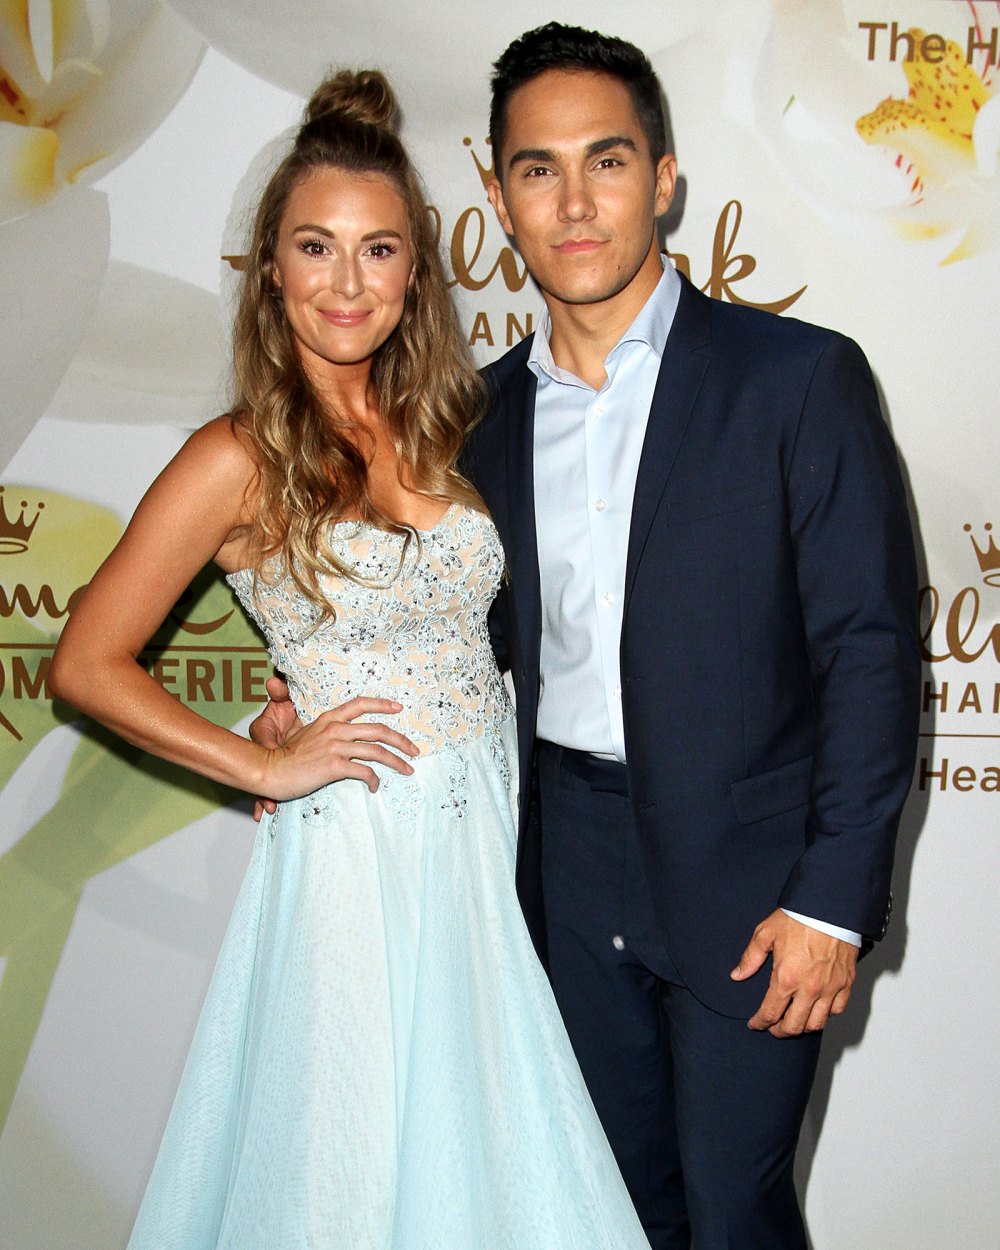 Alexa PenaVega Admits Her ‘Favorite’ Proposal Idea Is Something Husband Carlos PenaVega Wasn’t Able to Pull Off: He ‘Chickened Out’